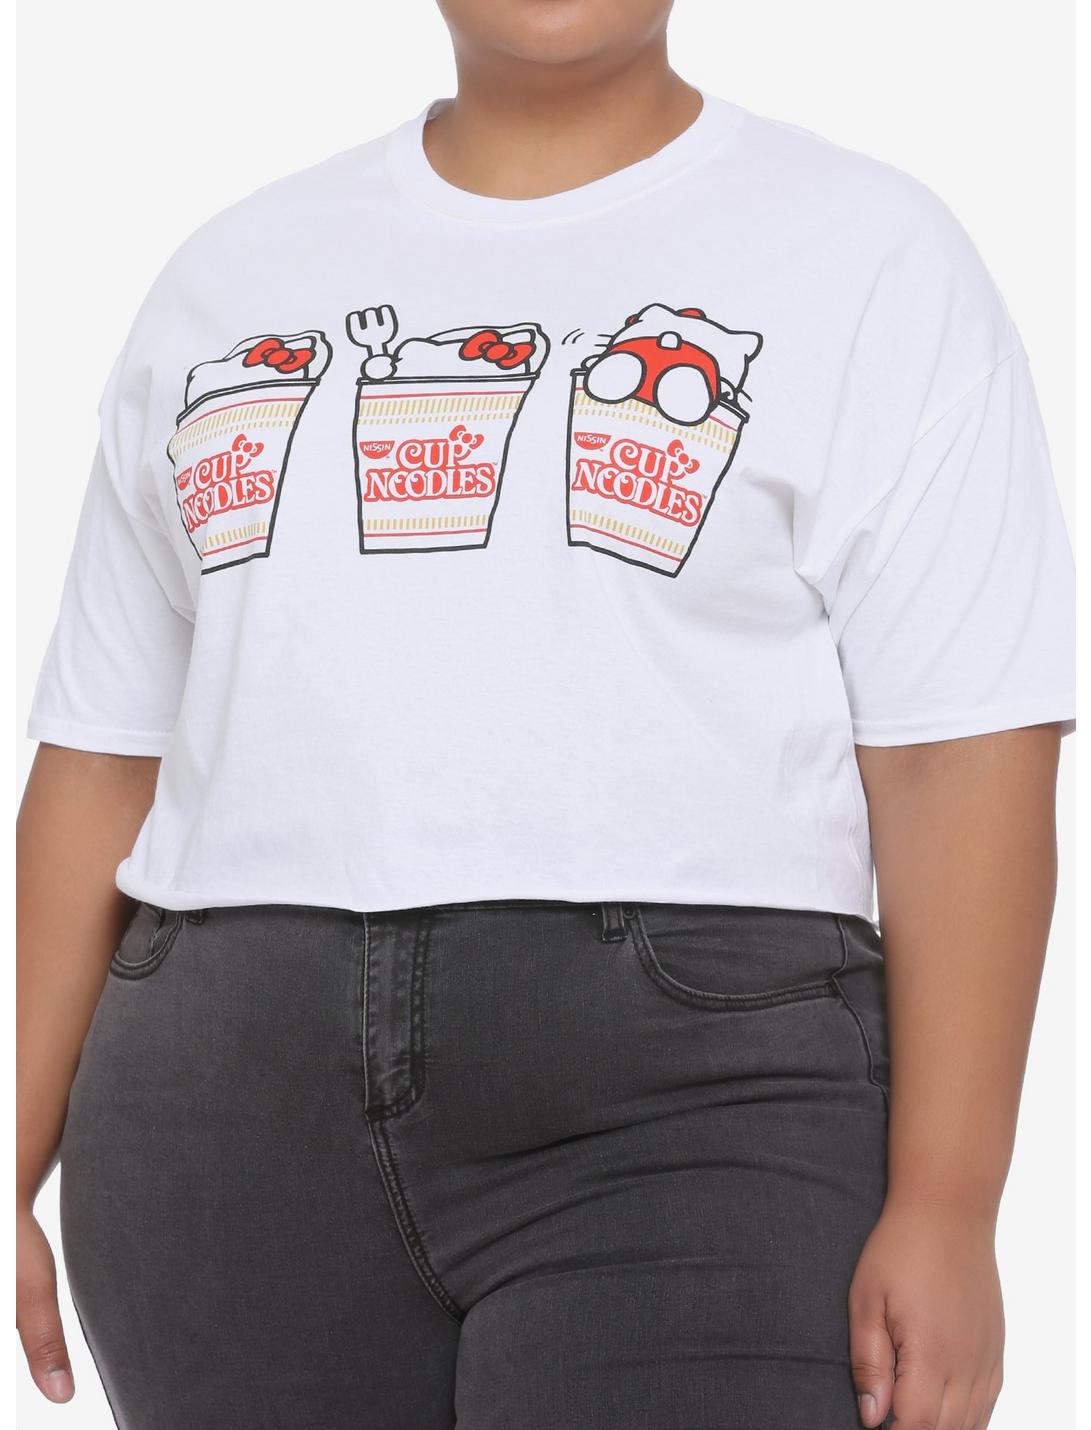 Nissin Cup Noodles X Hello Kitty Climbing Girls Crop T-Shirt Plus Size, MULTI, hi-res